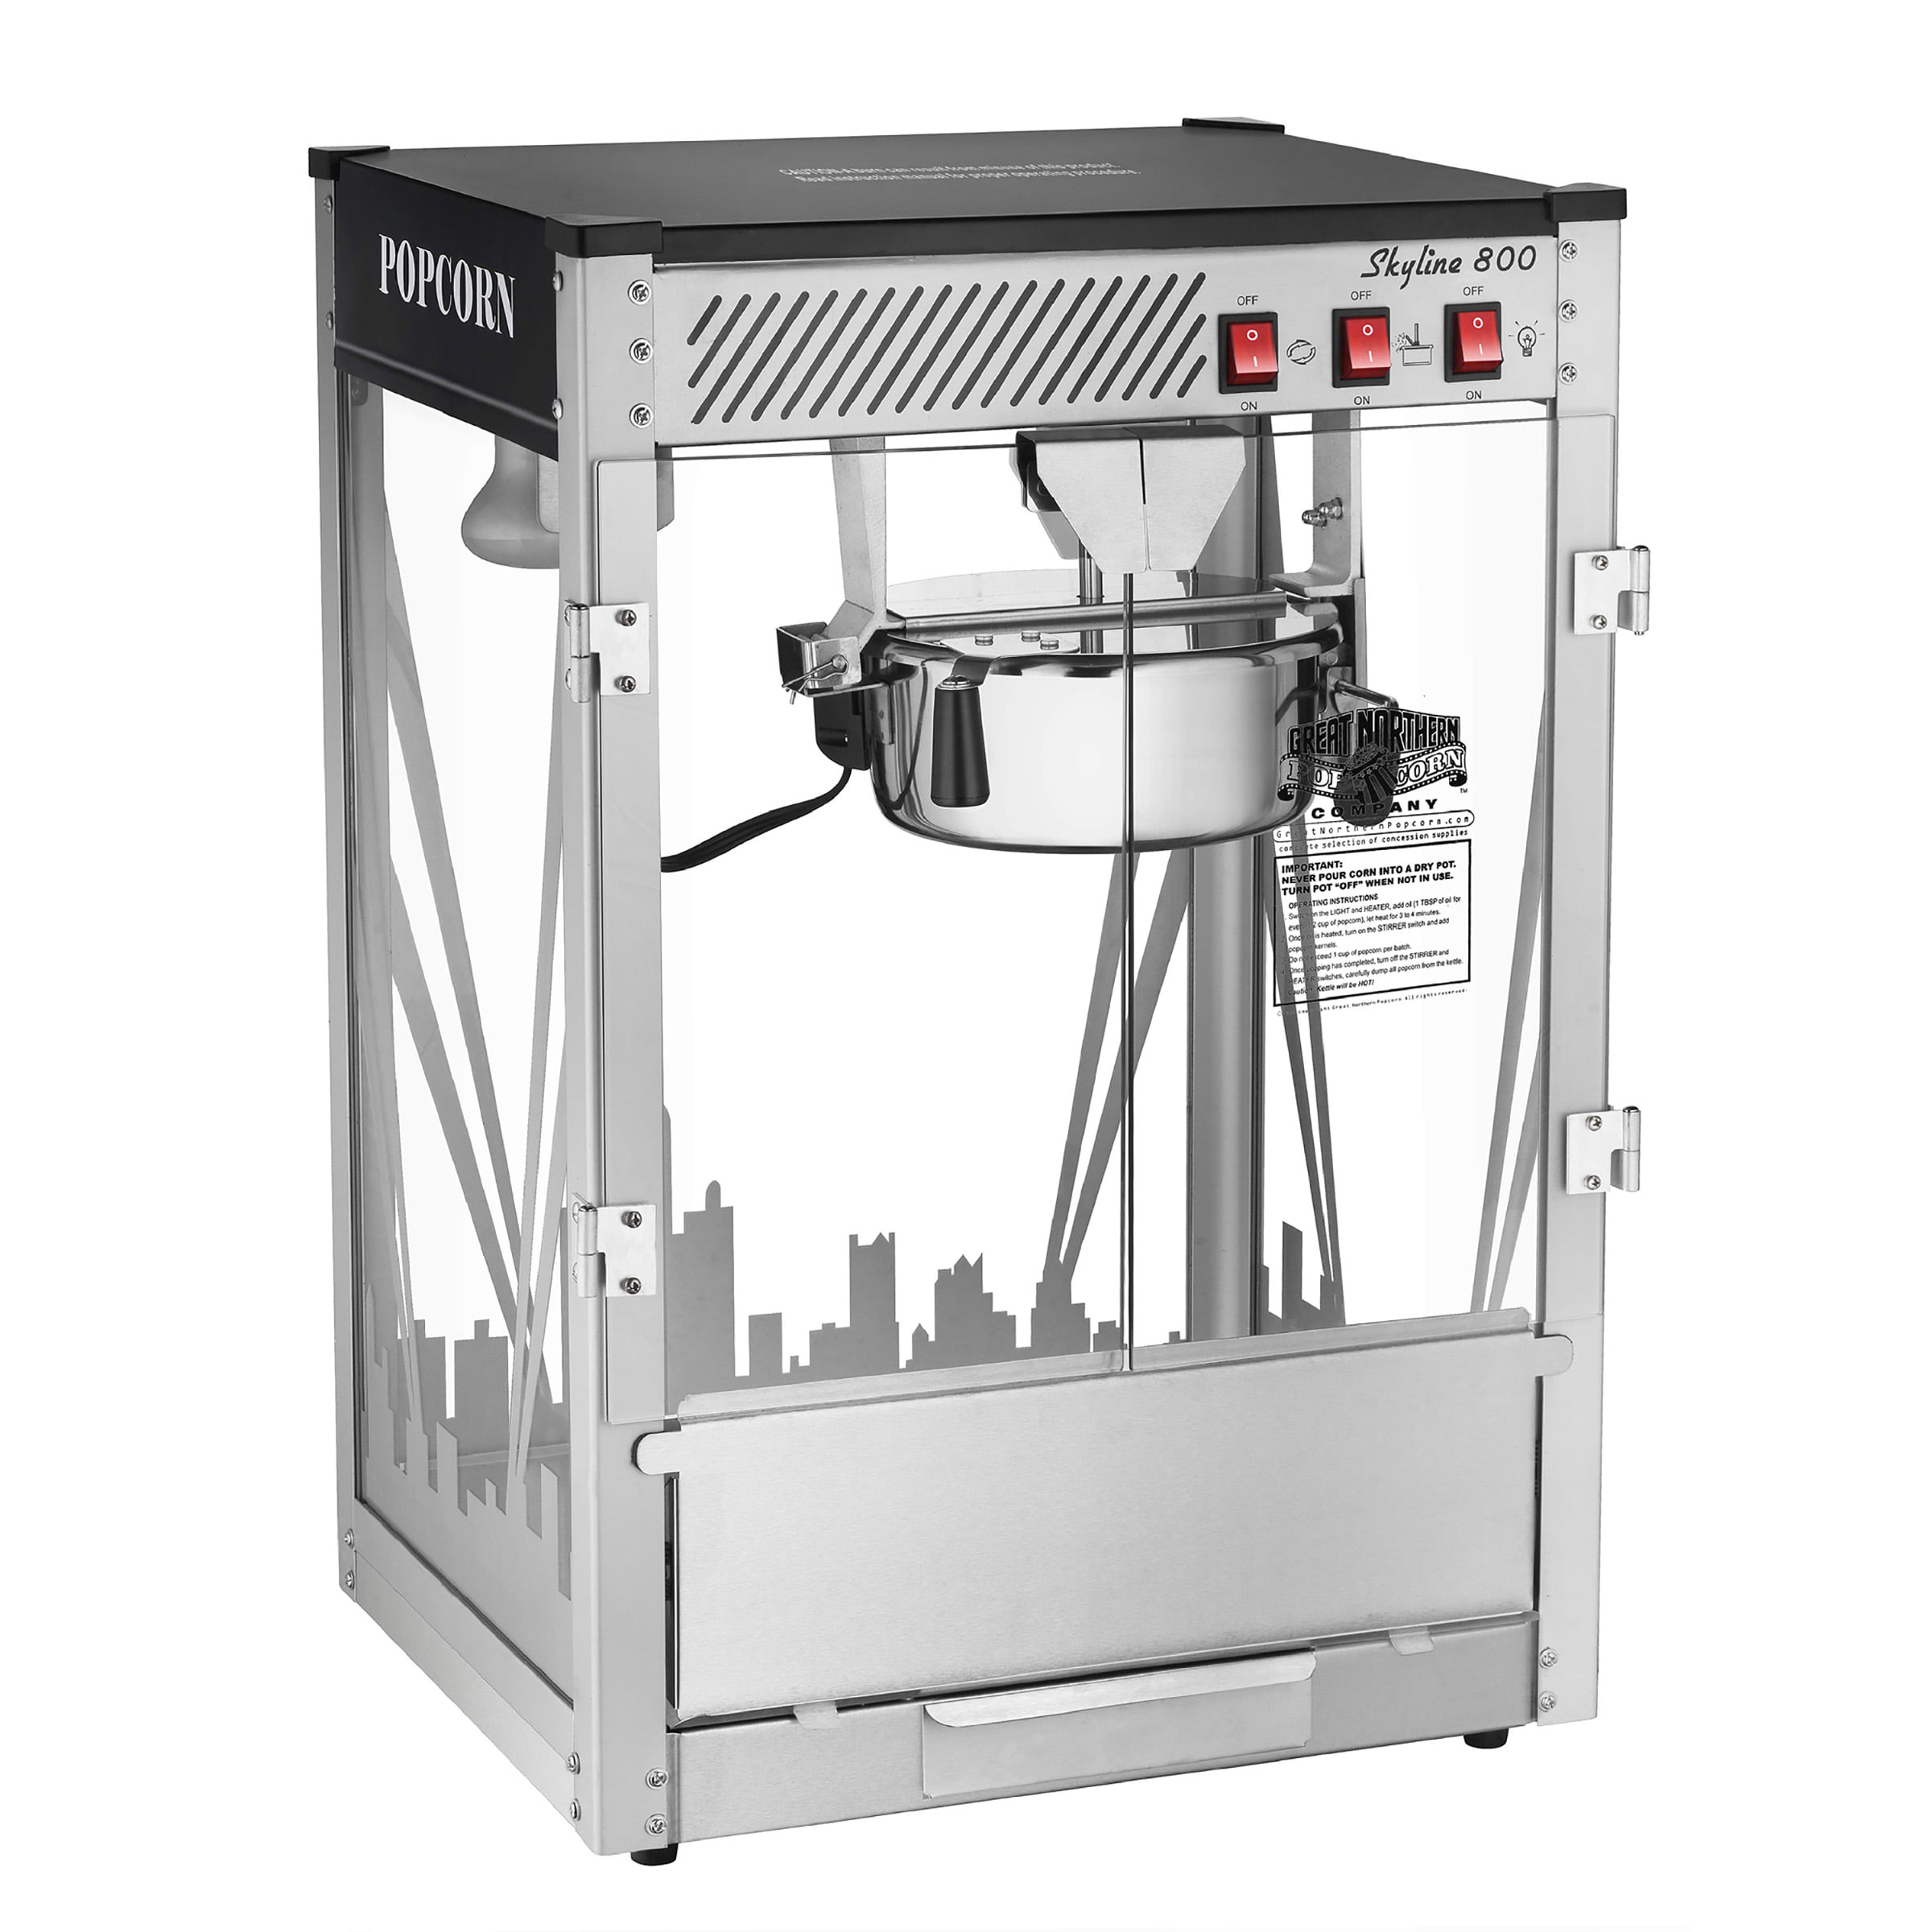 Buy Wholesale China Large-scale Commercial Popcorn Production And  Processing Machine Equipment & Commercial Popcorn Machine at USD 6800